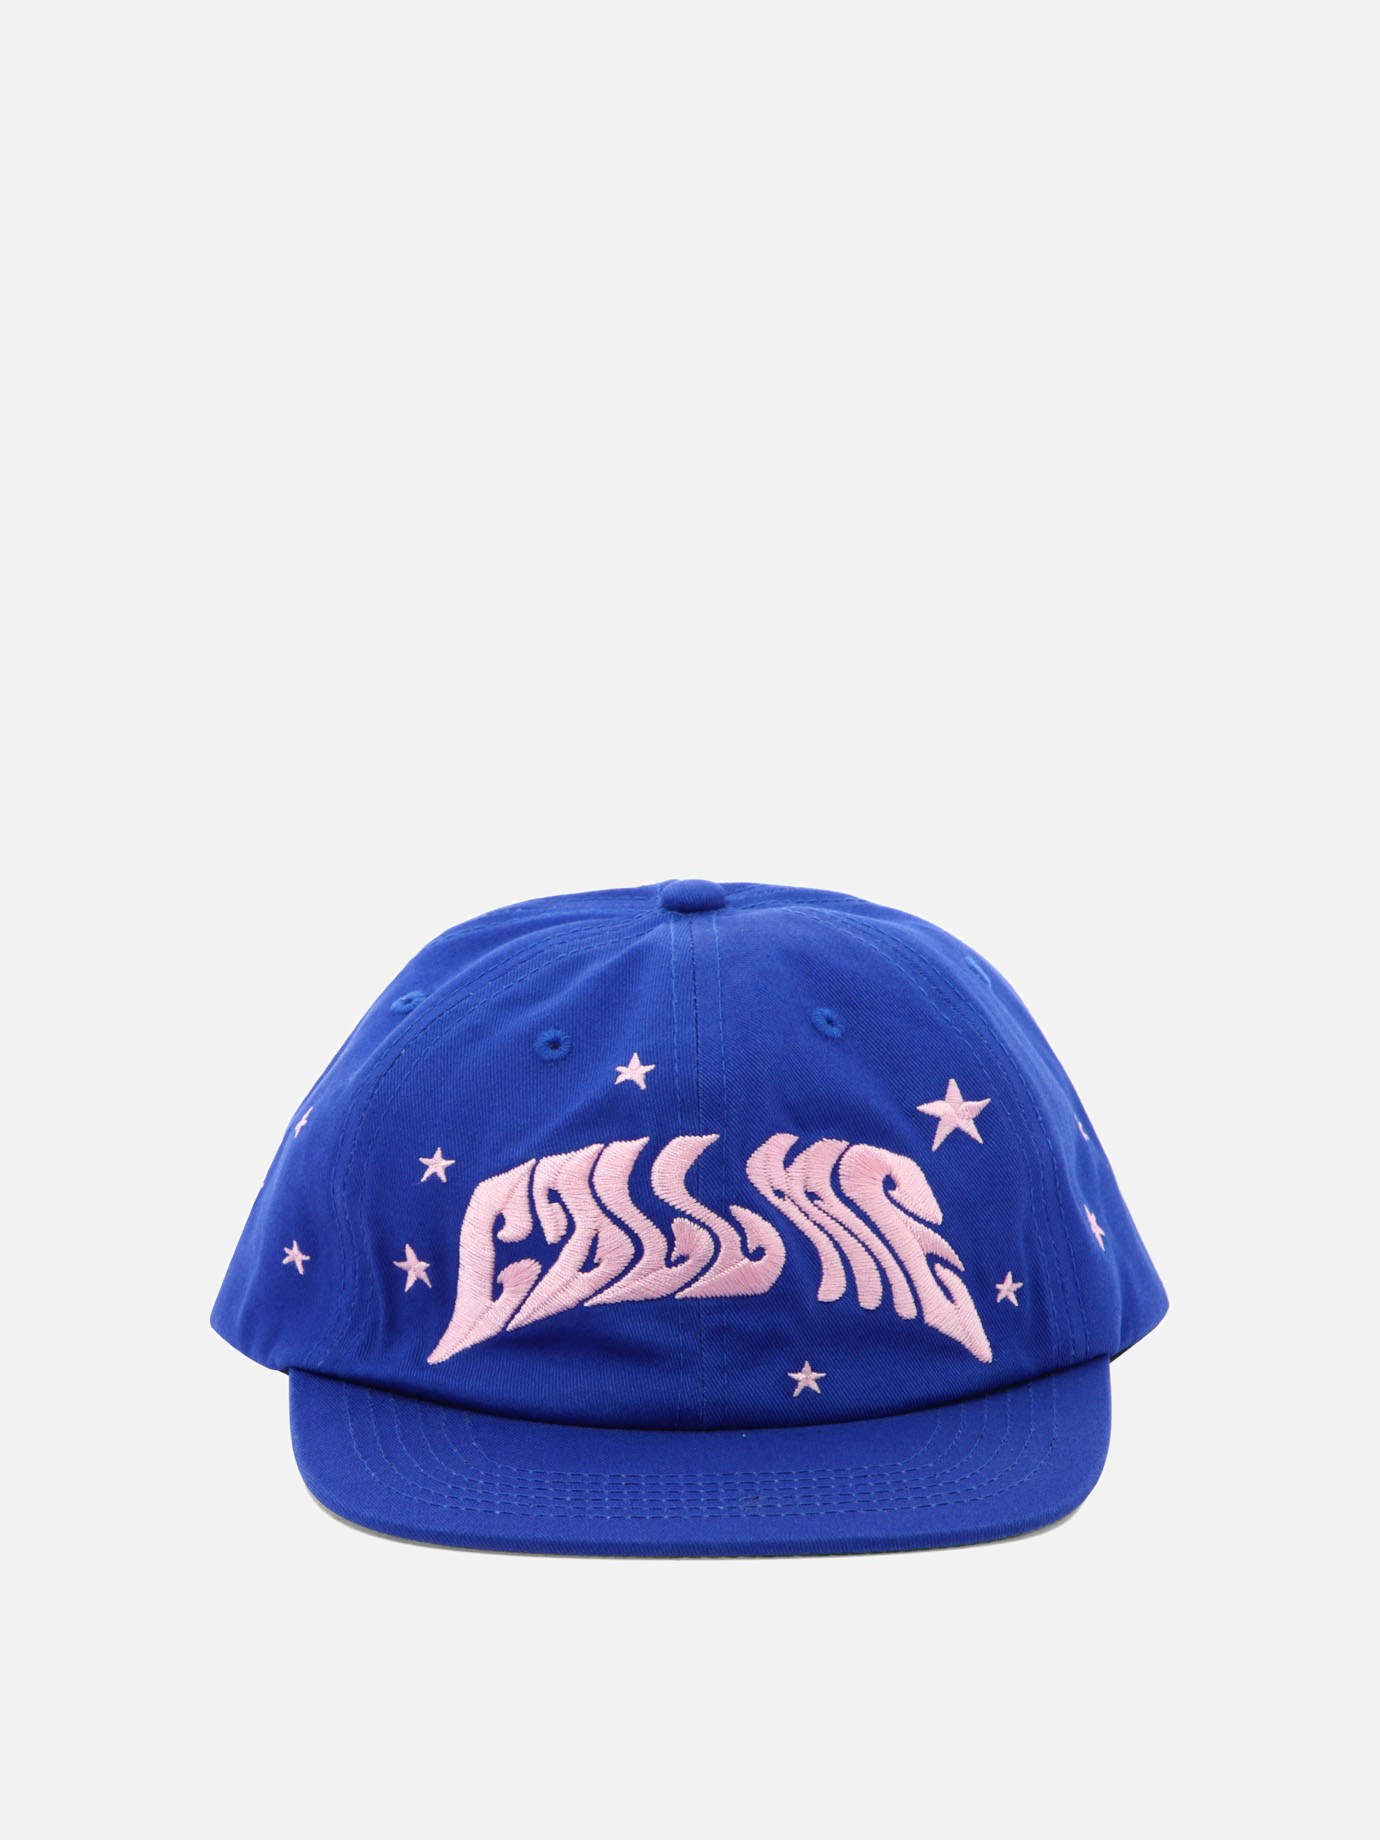 Cappellino  Stars Blue Snapback by Call Me 917 - 1